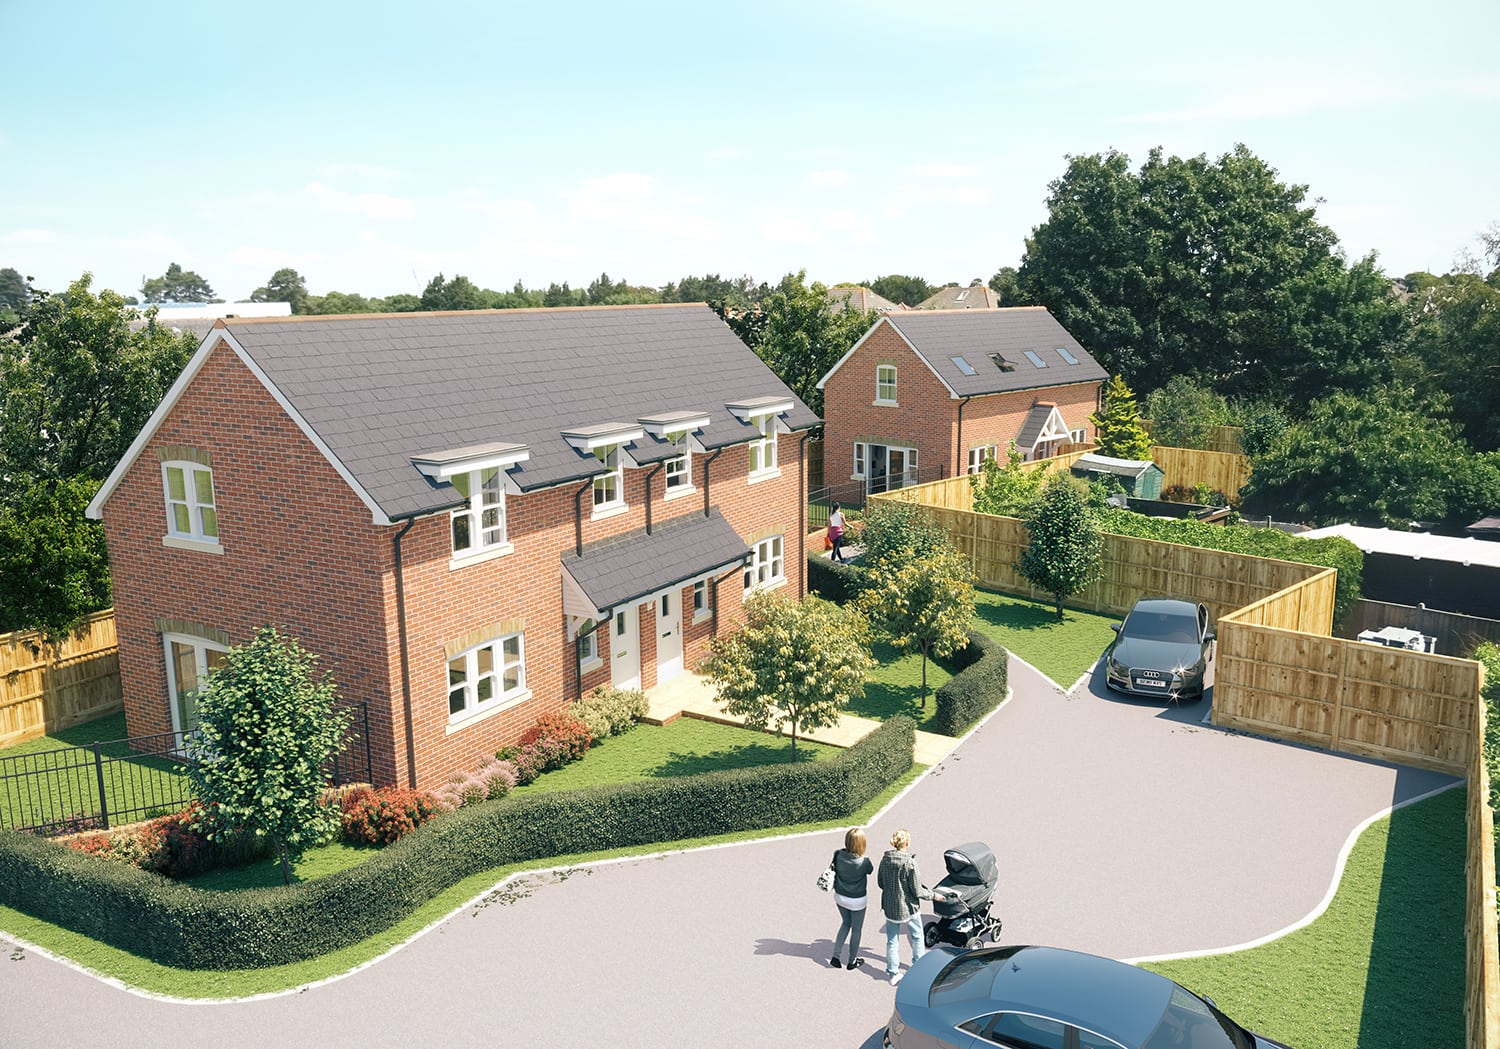 new 2 bedroom homes for sale in boscombe